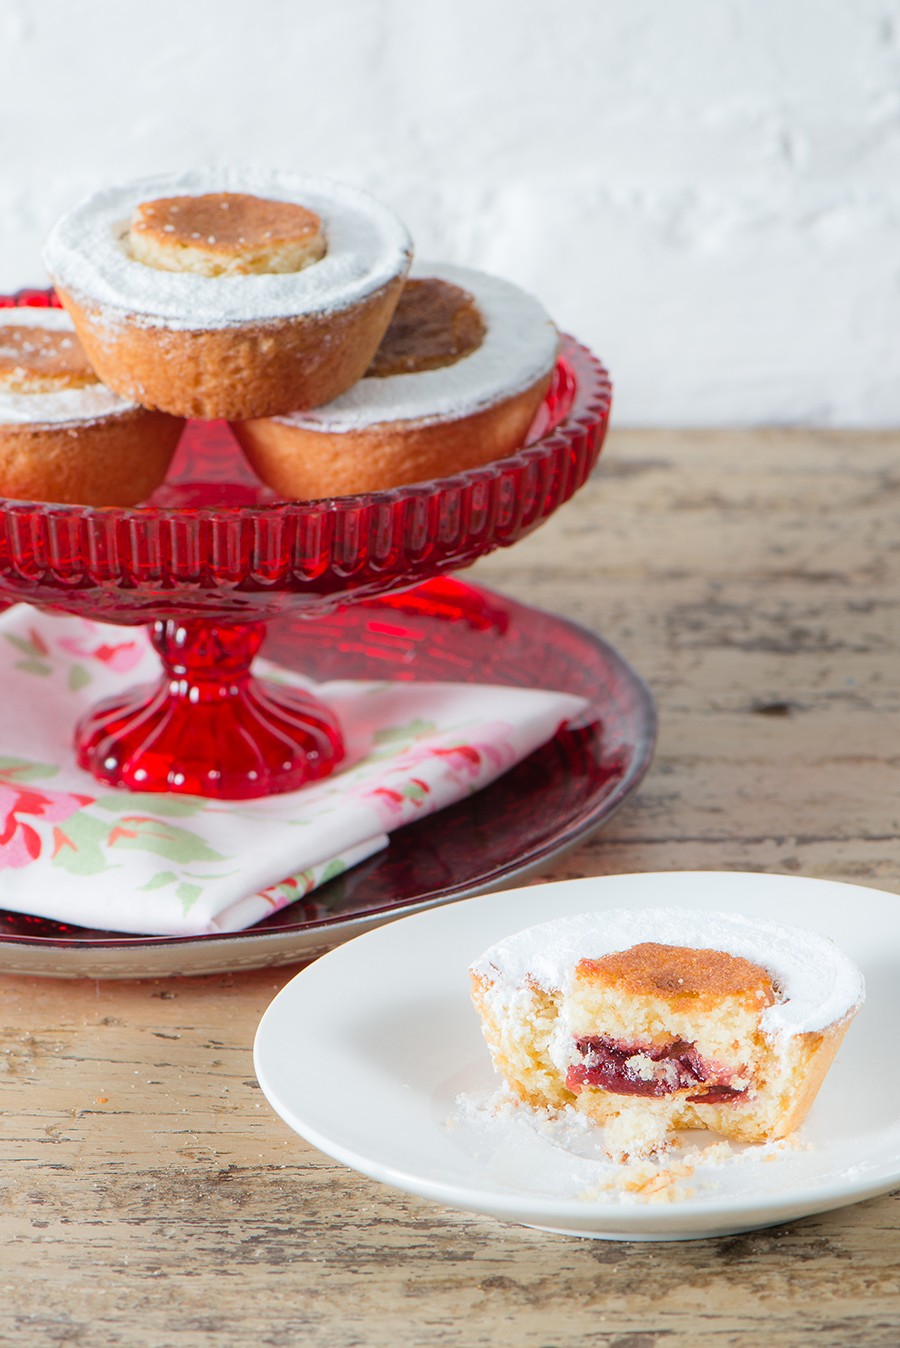 A bakewell tart is just the thing for a fancy afternoon tea.